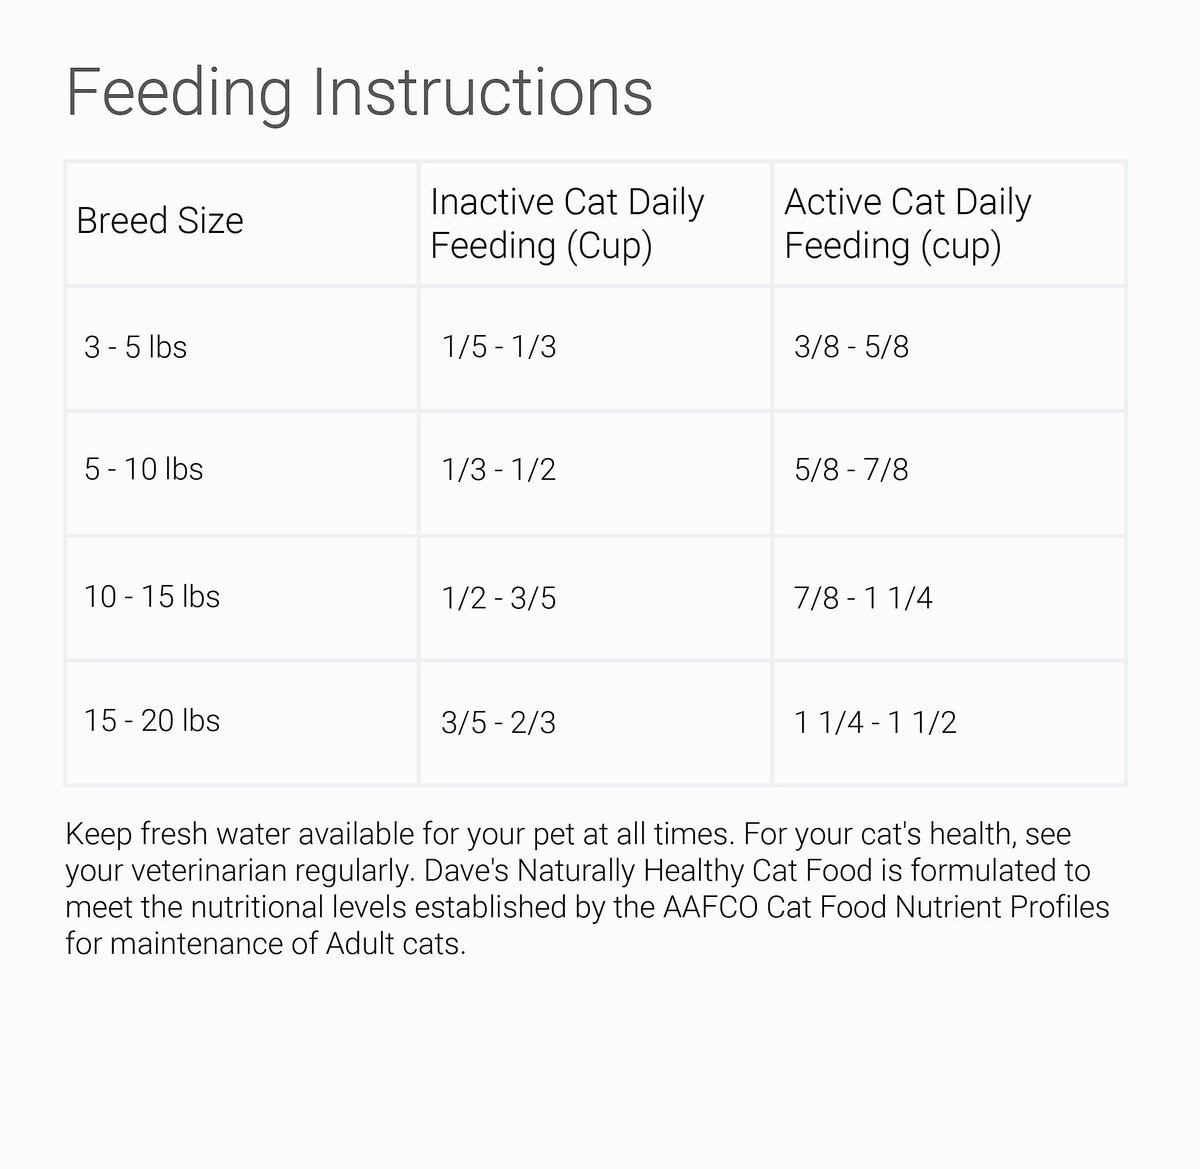 Dave’s Naturally Healthy Adult Dry Cat Food